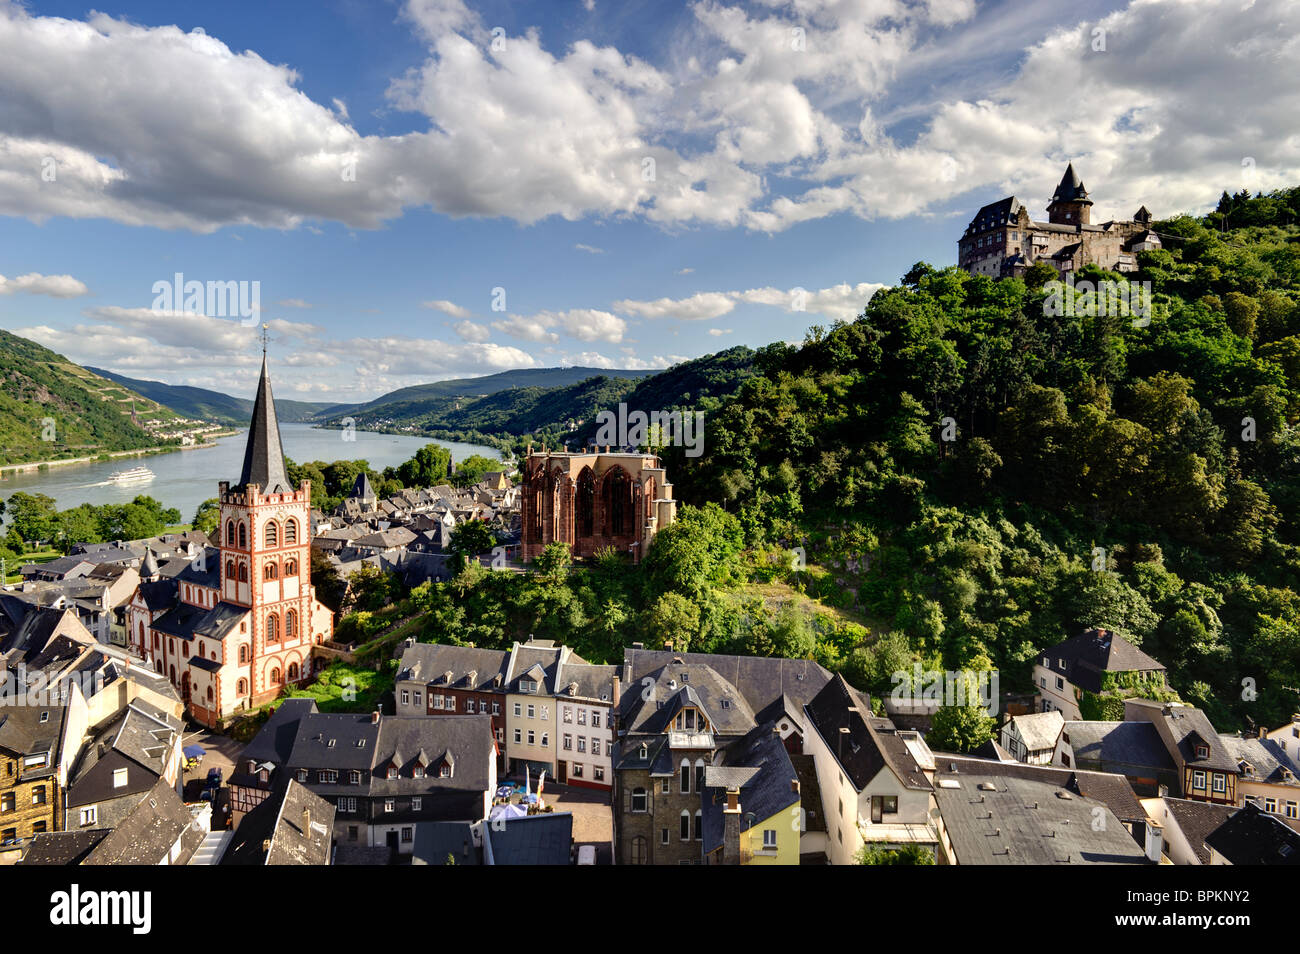 View of Bacharach am Rhein, with St. Peter's Church, Werner Chapel and Burg Stahleck, Rhineland-Palatinate, Germany, Europe Stock Photo